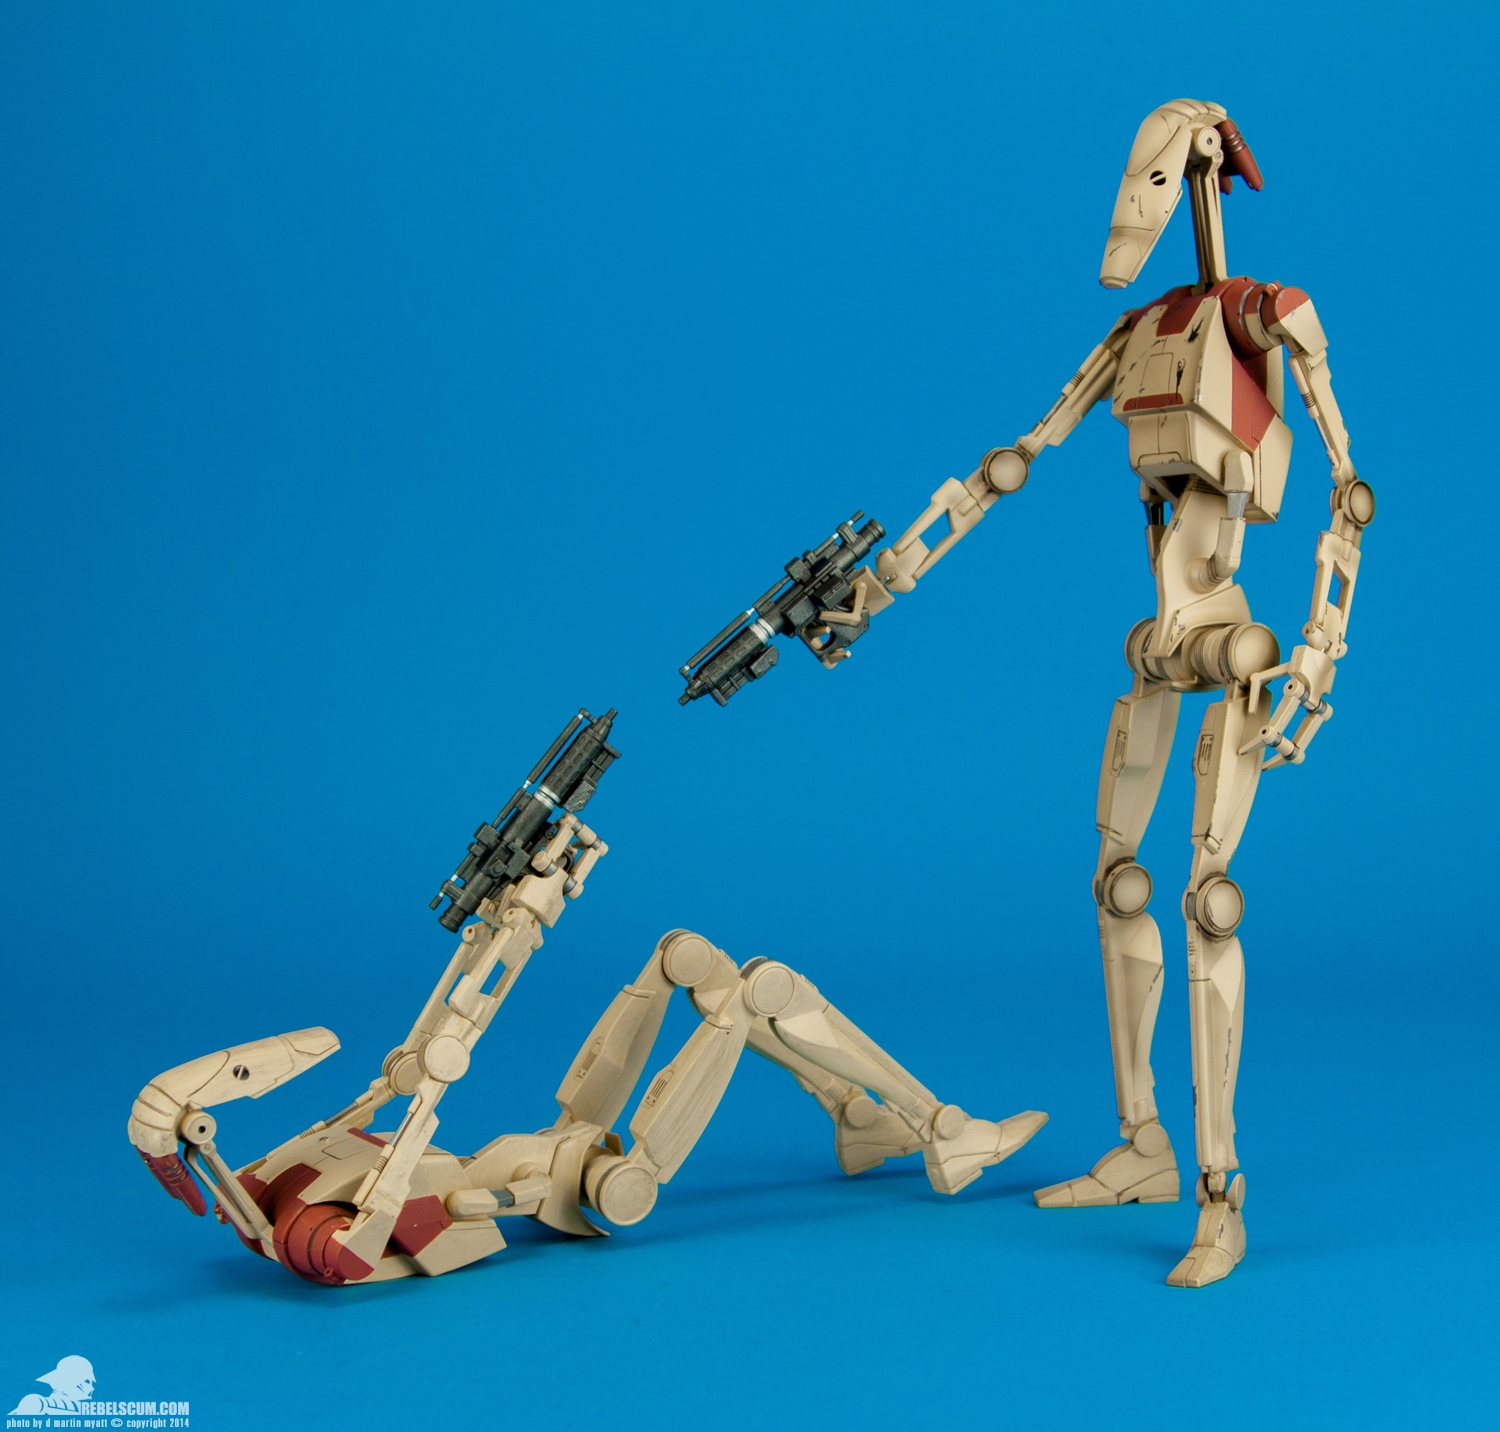 Security-Droids-Sixth-Scale-Sideshow-Collectibles-013.jpg